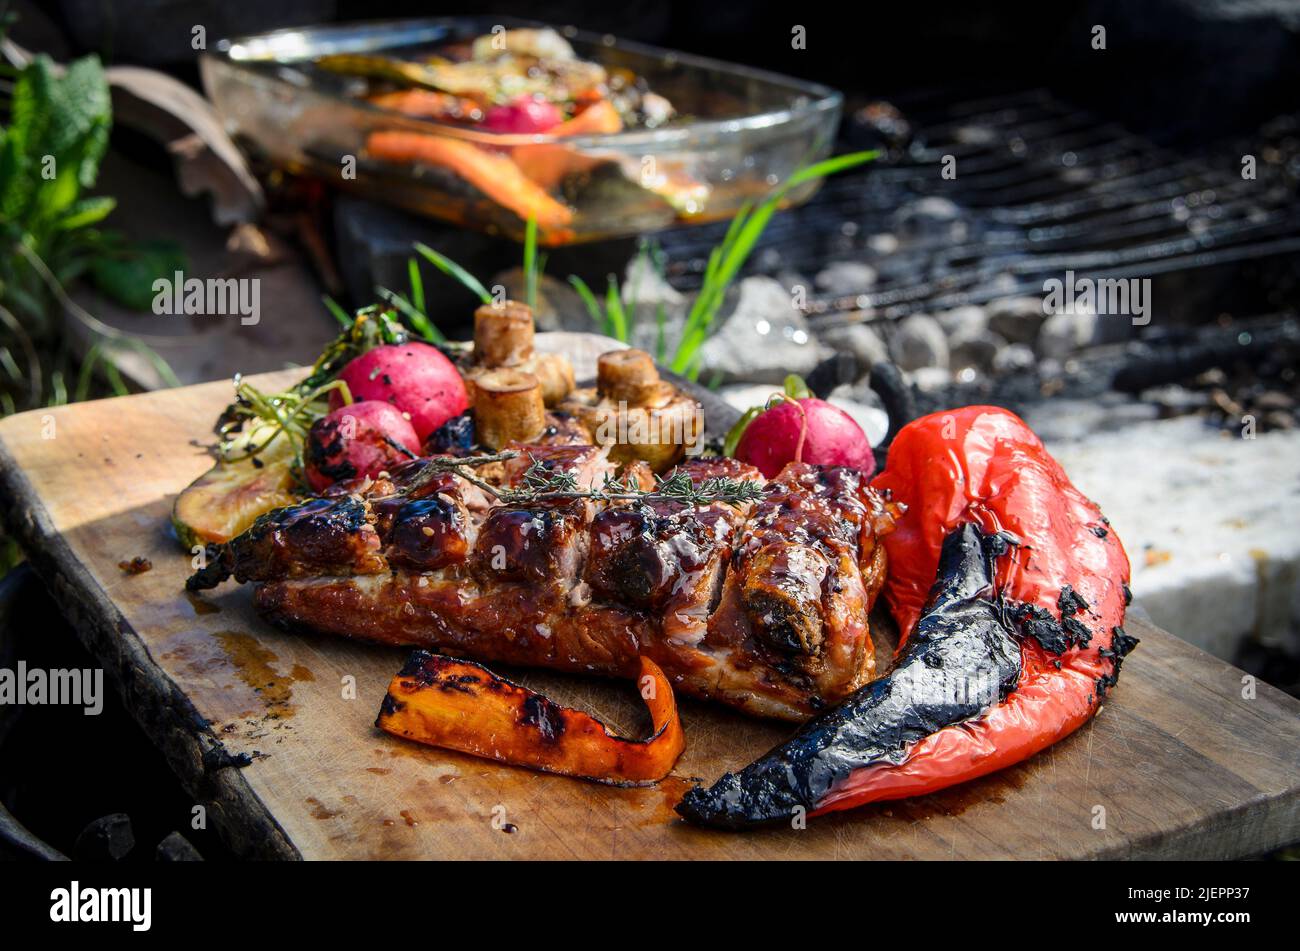 Grilled pork ribs and grilled vegetables Stock Photo